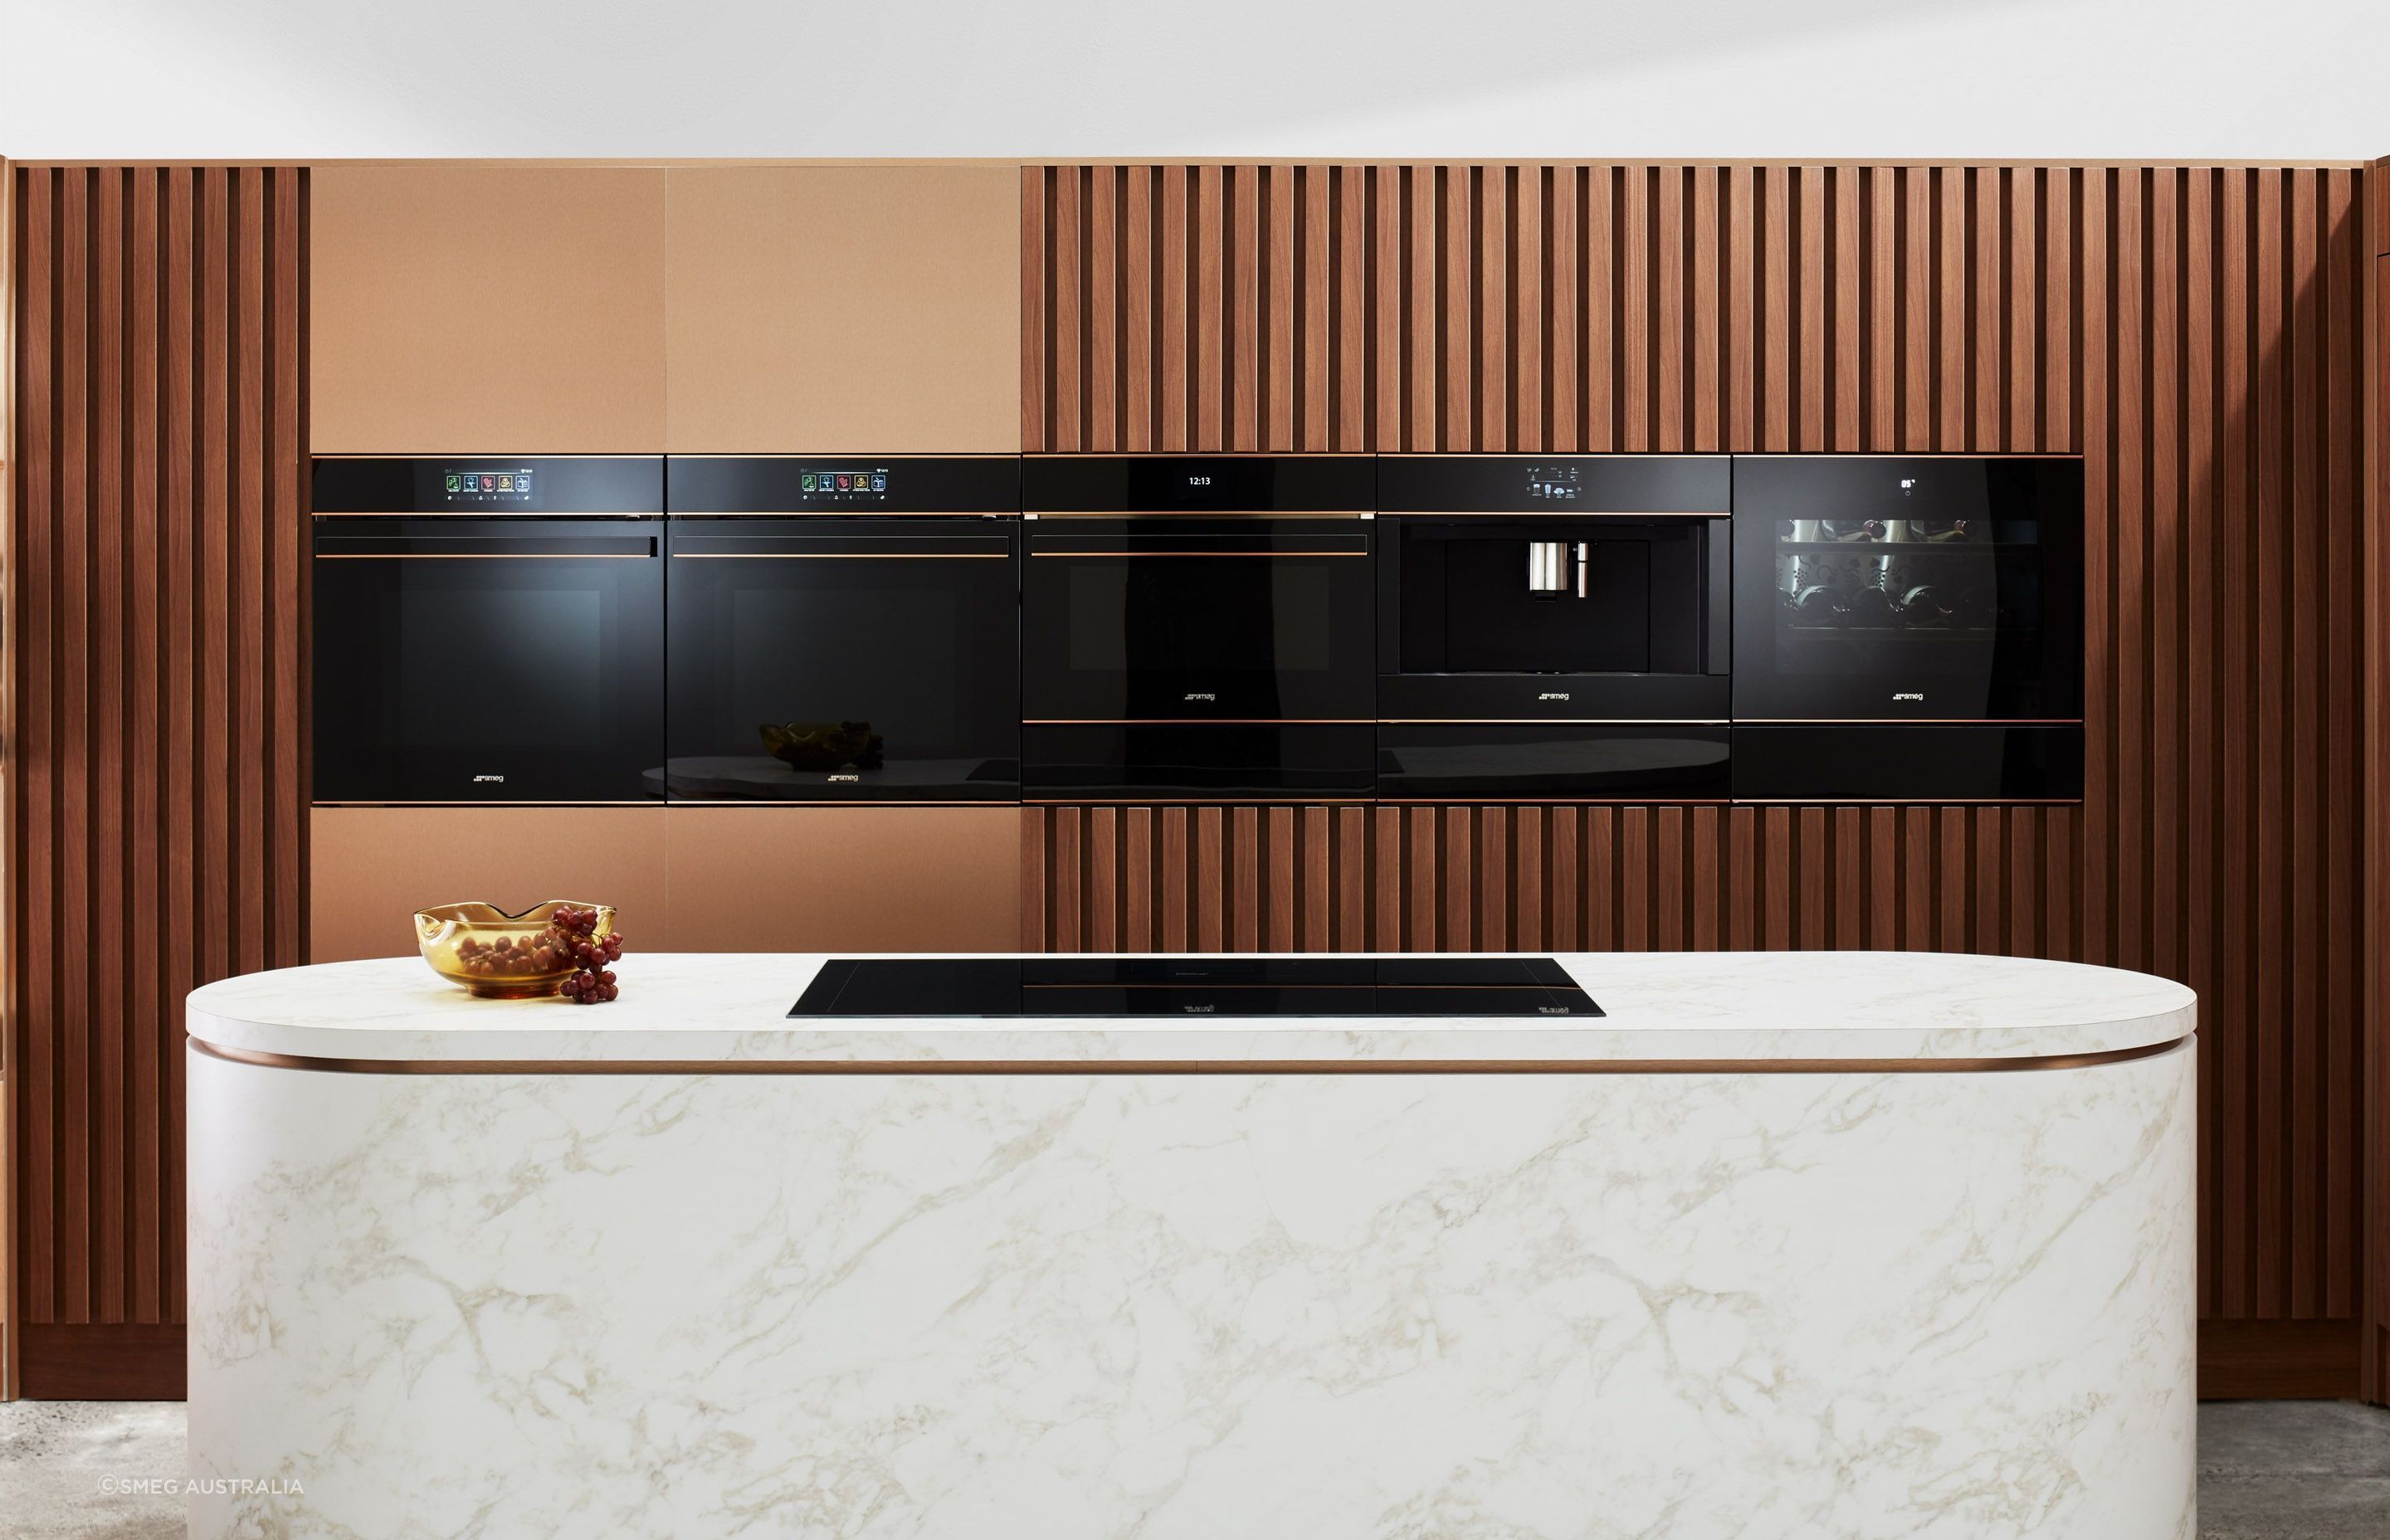 Designed and produced in Italy, Smeg ovens captivate with beautiful design and peak performance